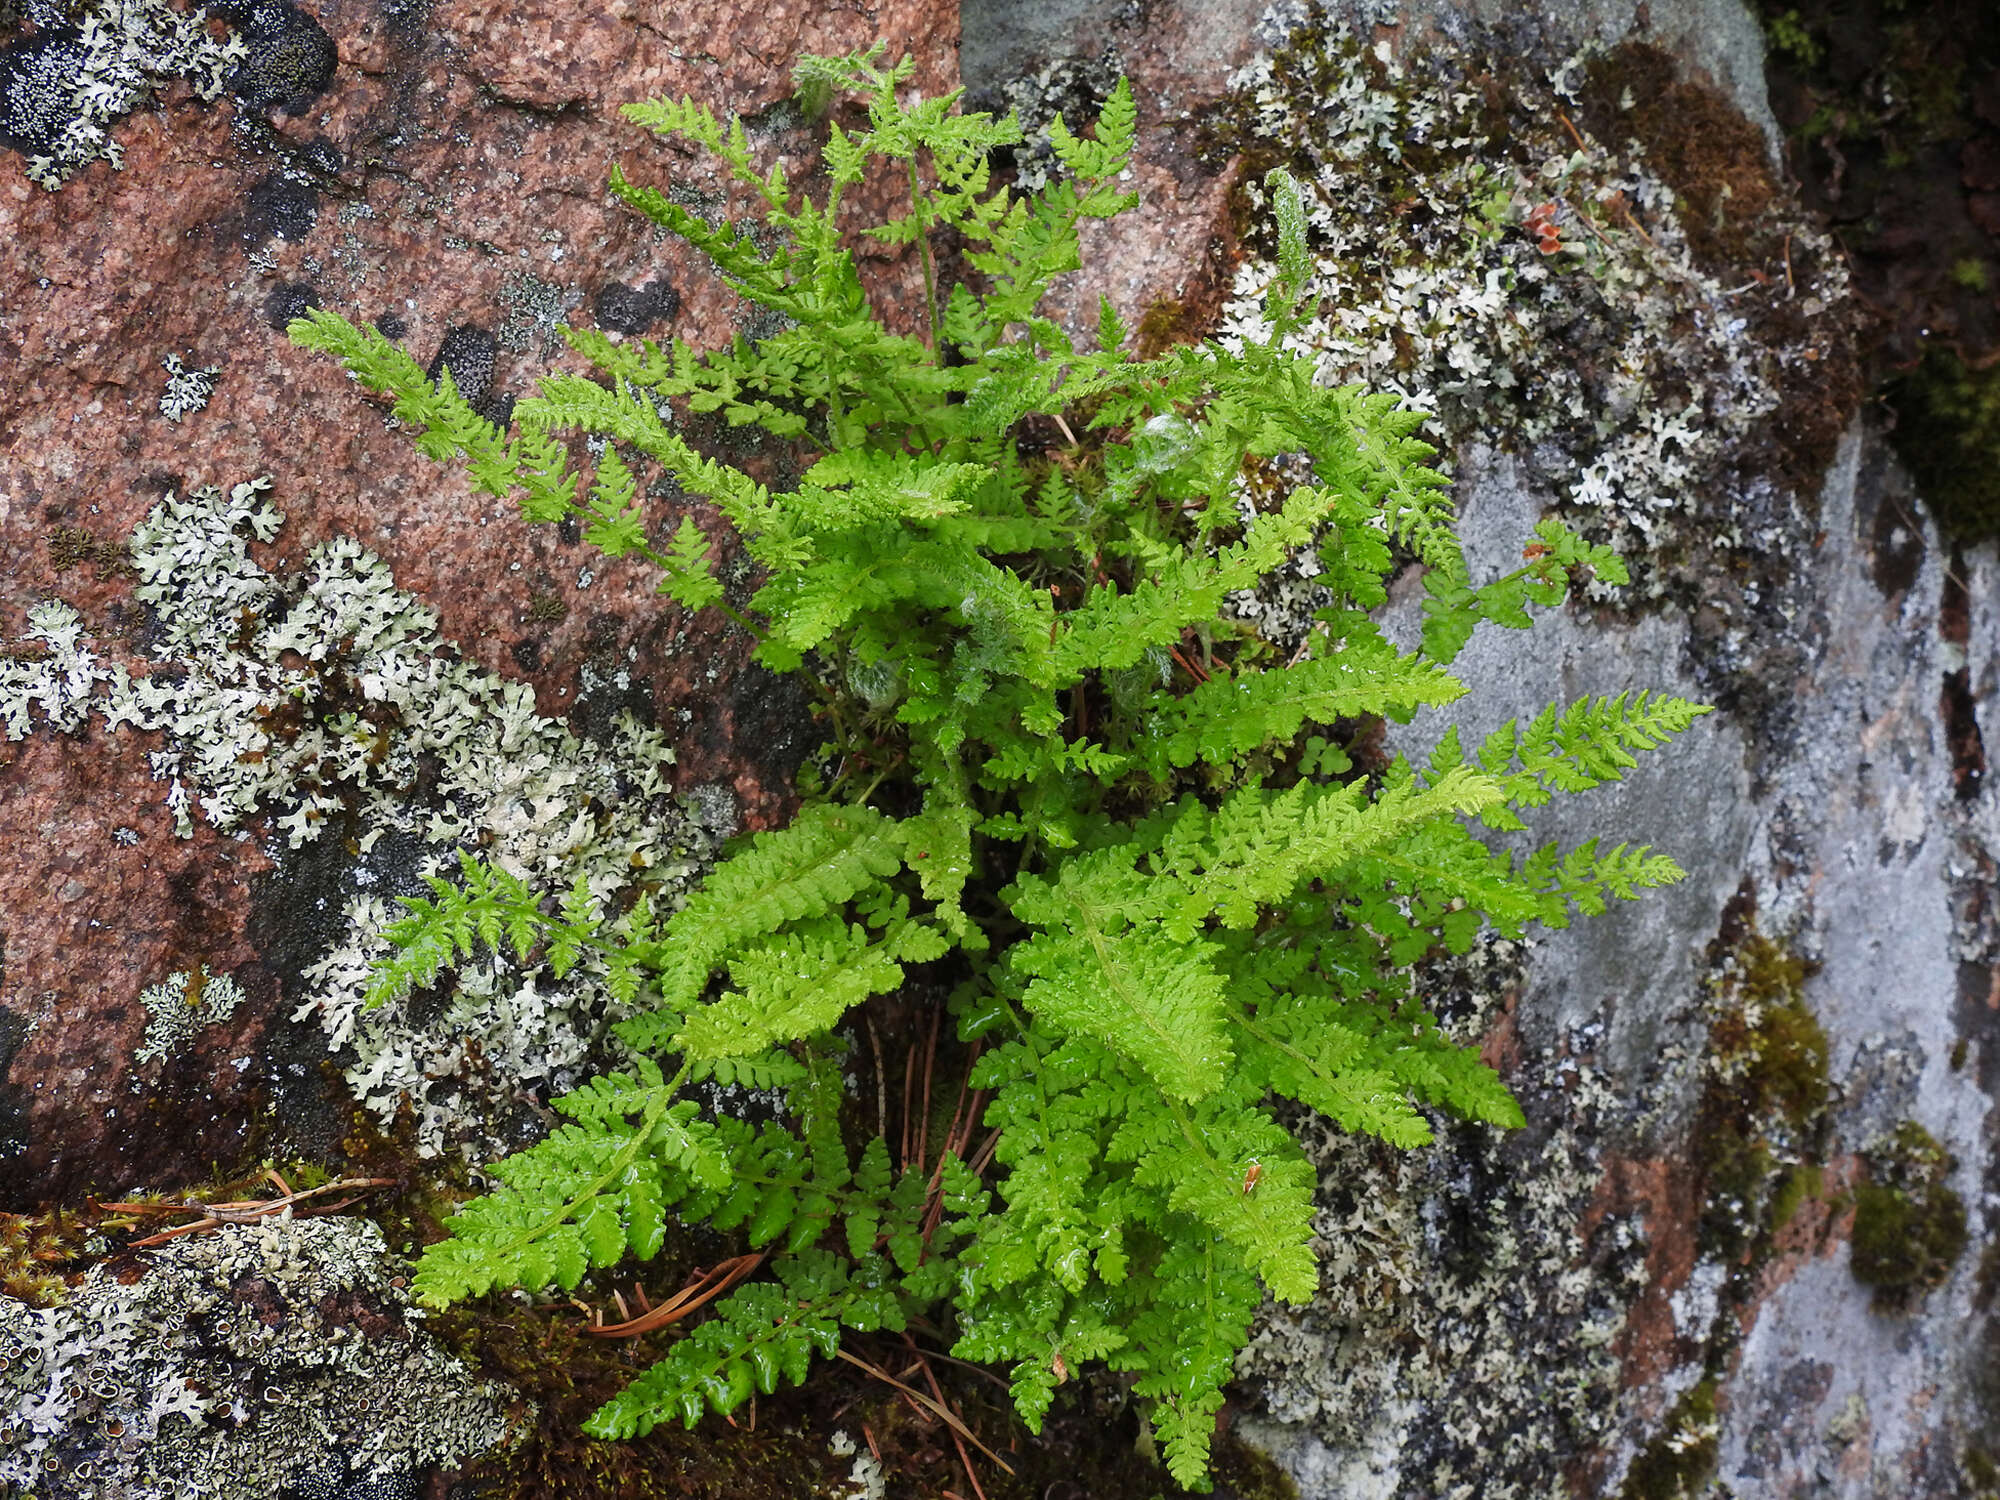 Image of Lady ferns and brittle ferns